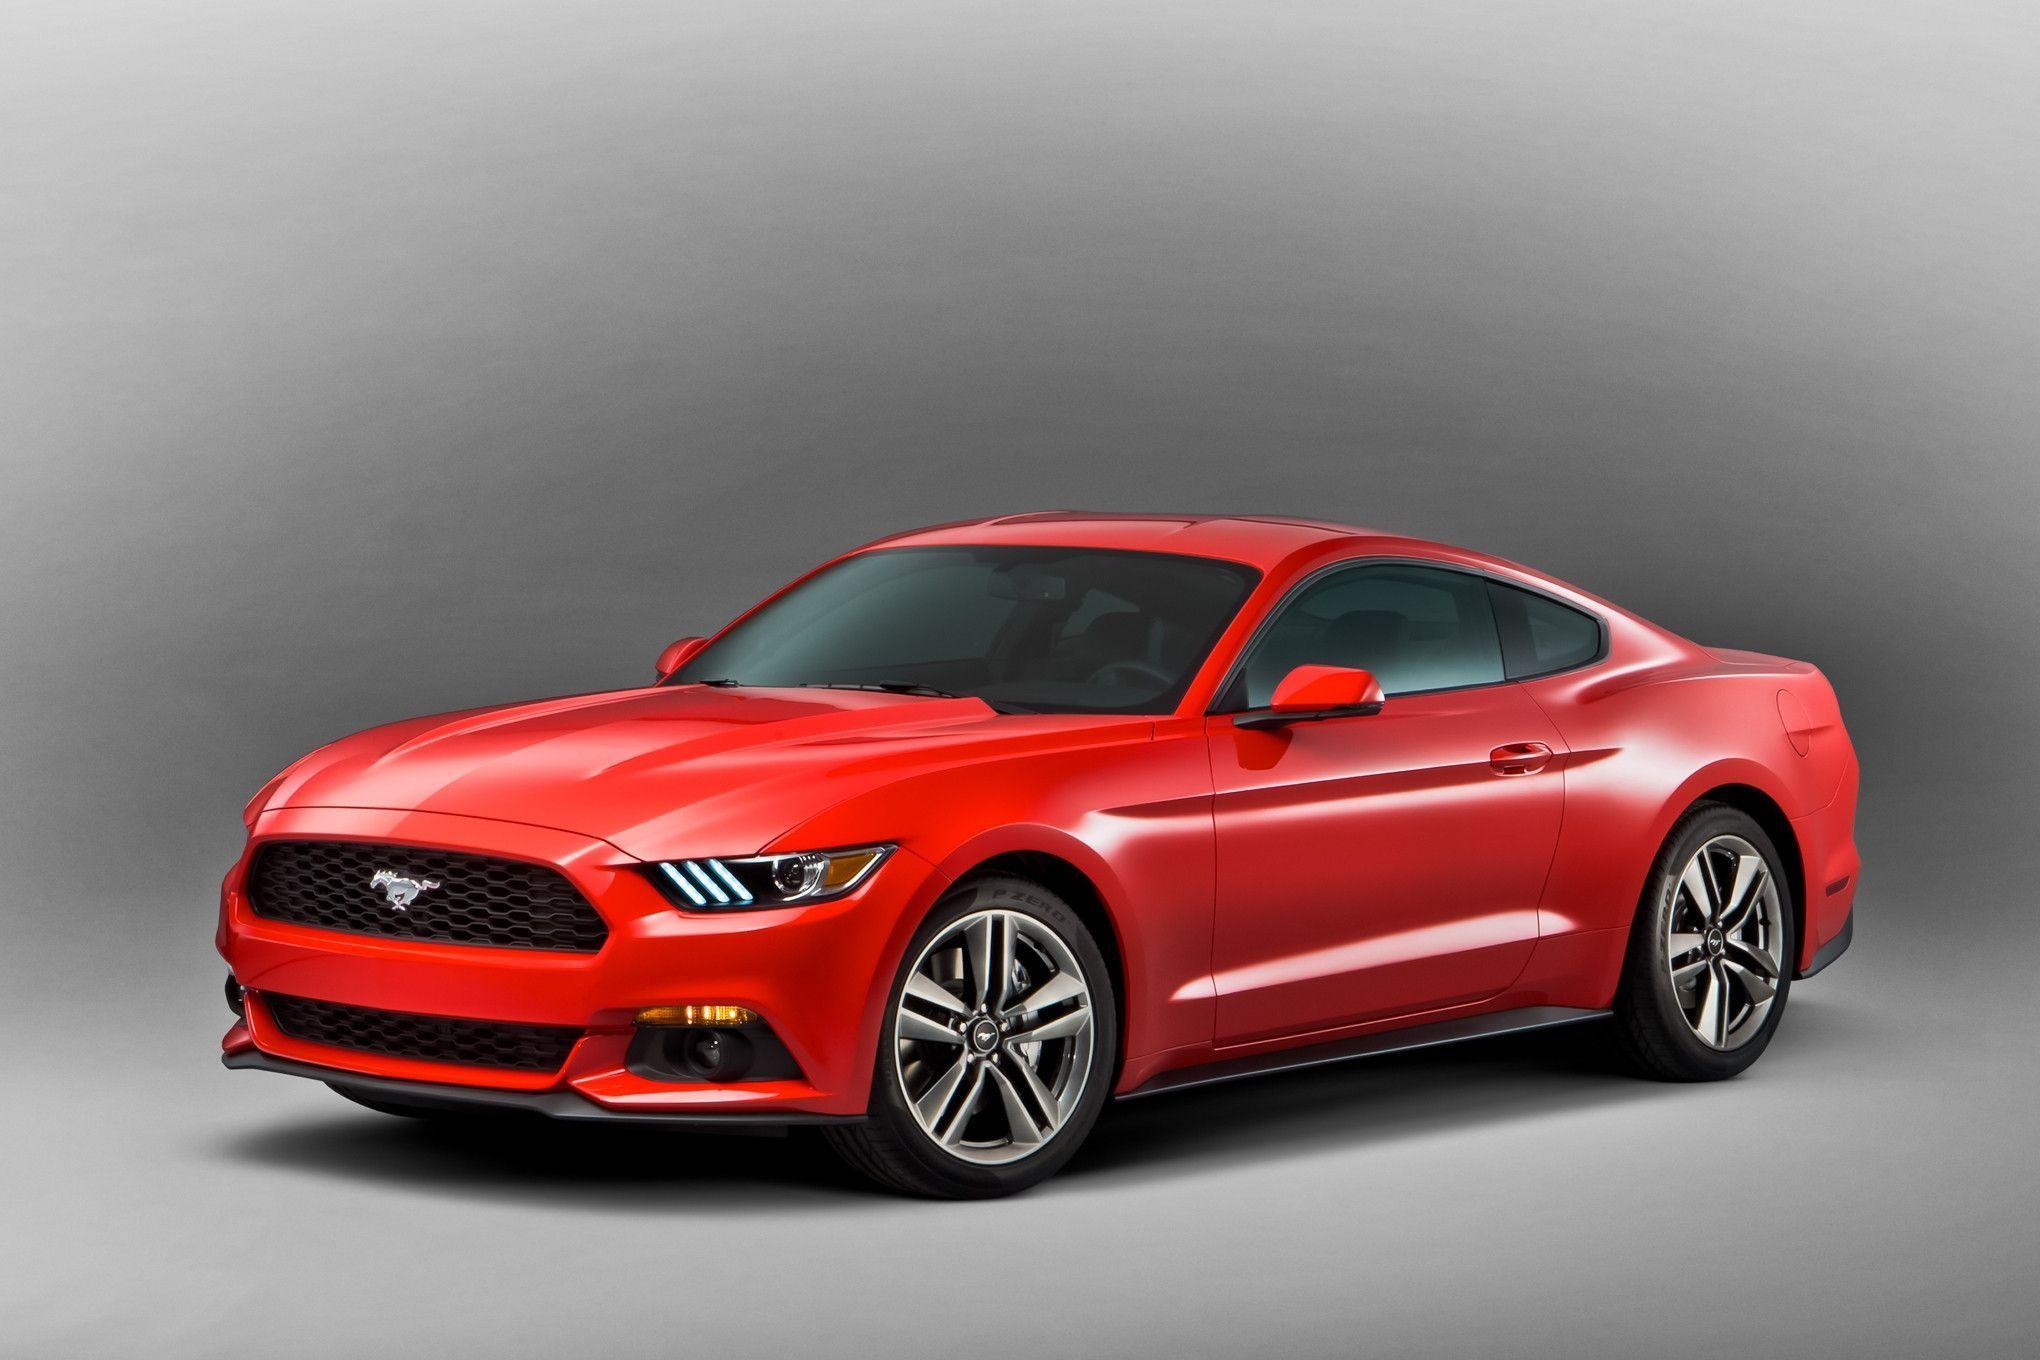 Ford Mustang GT Coupe Concept Wallpaper (8758). Cool Car